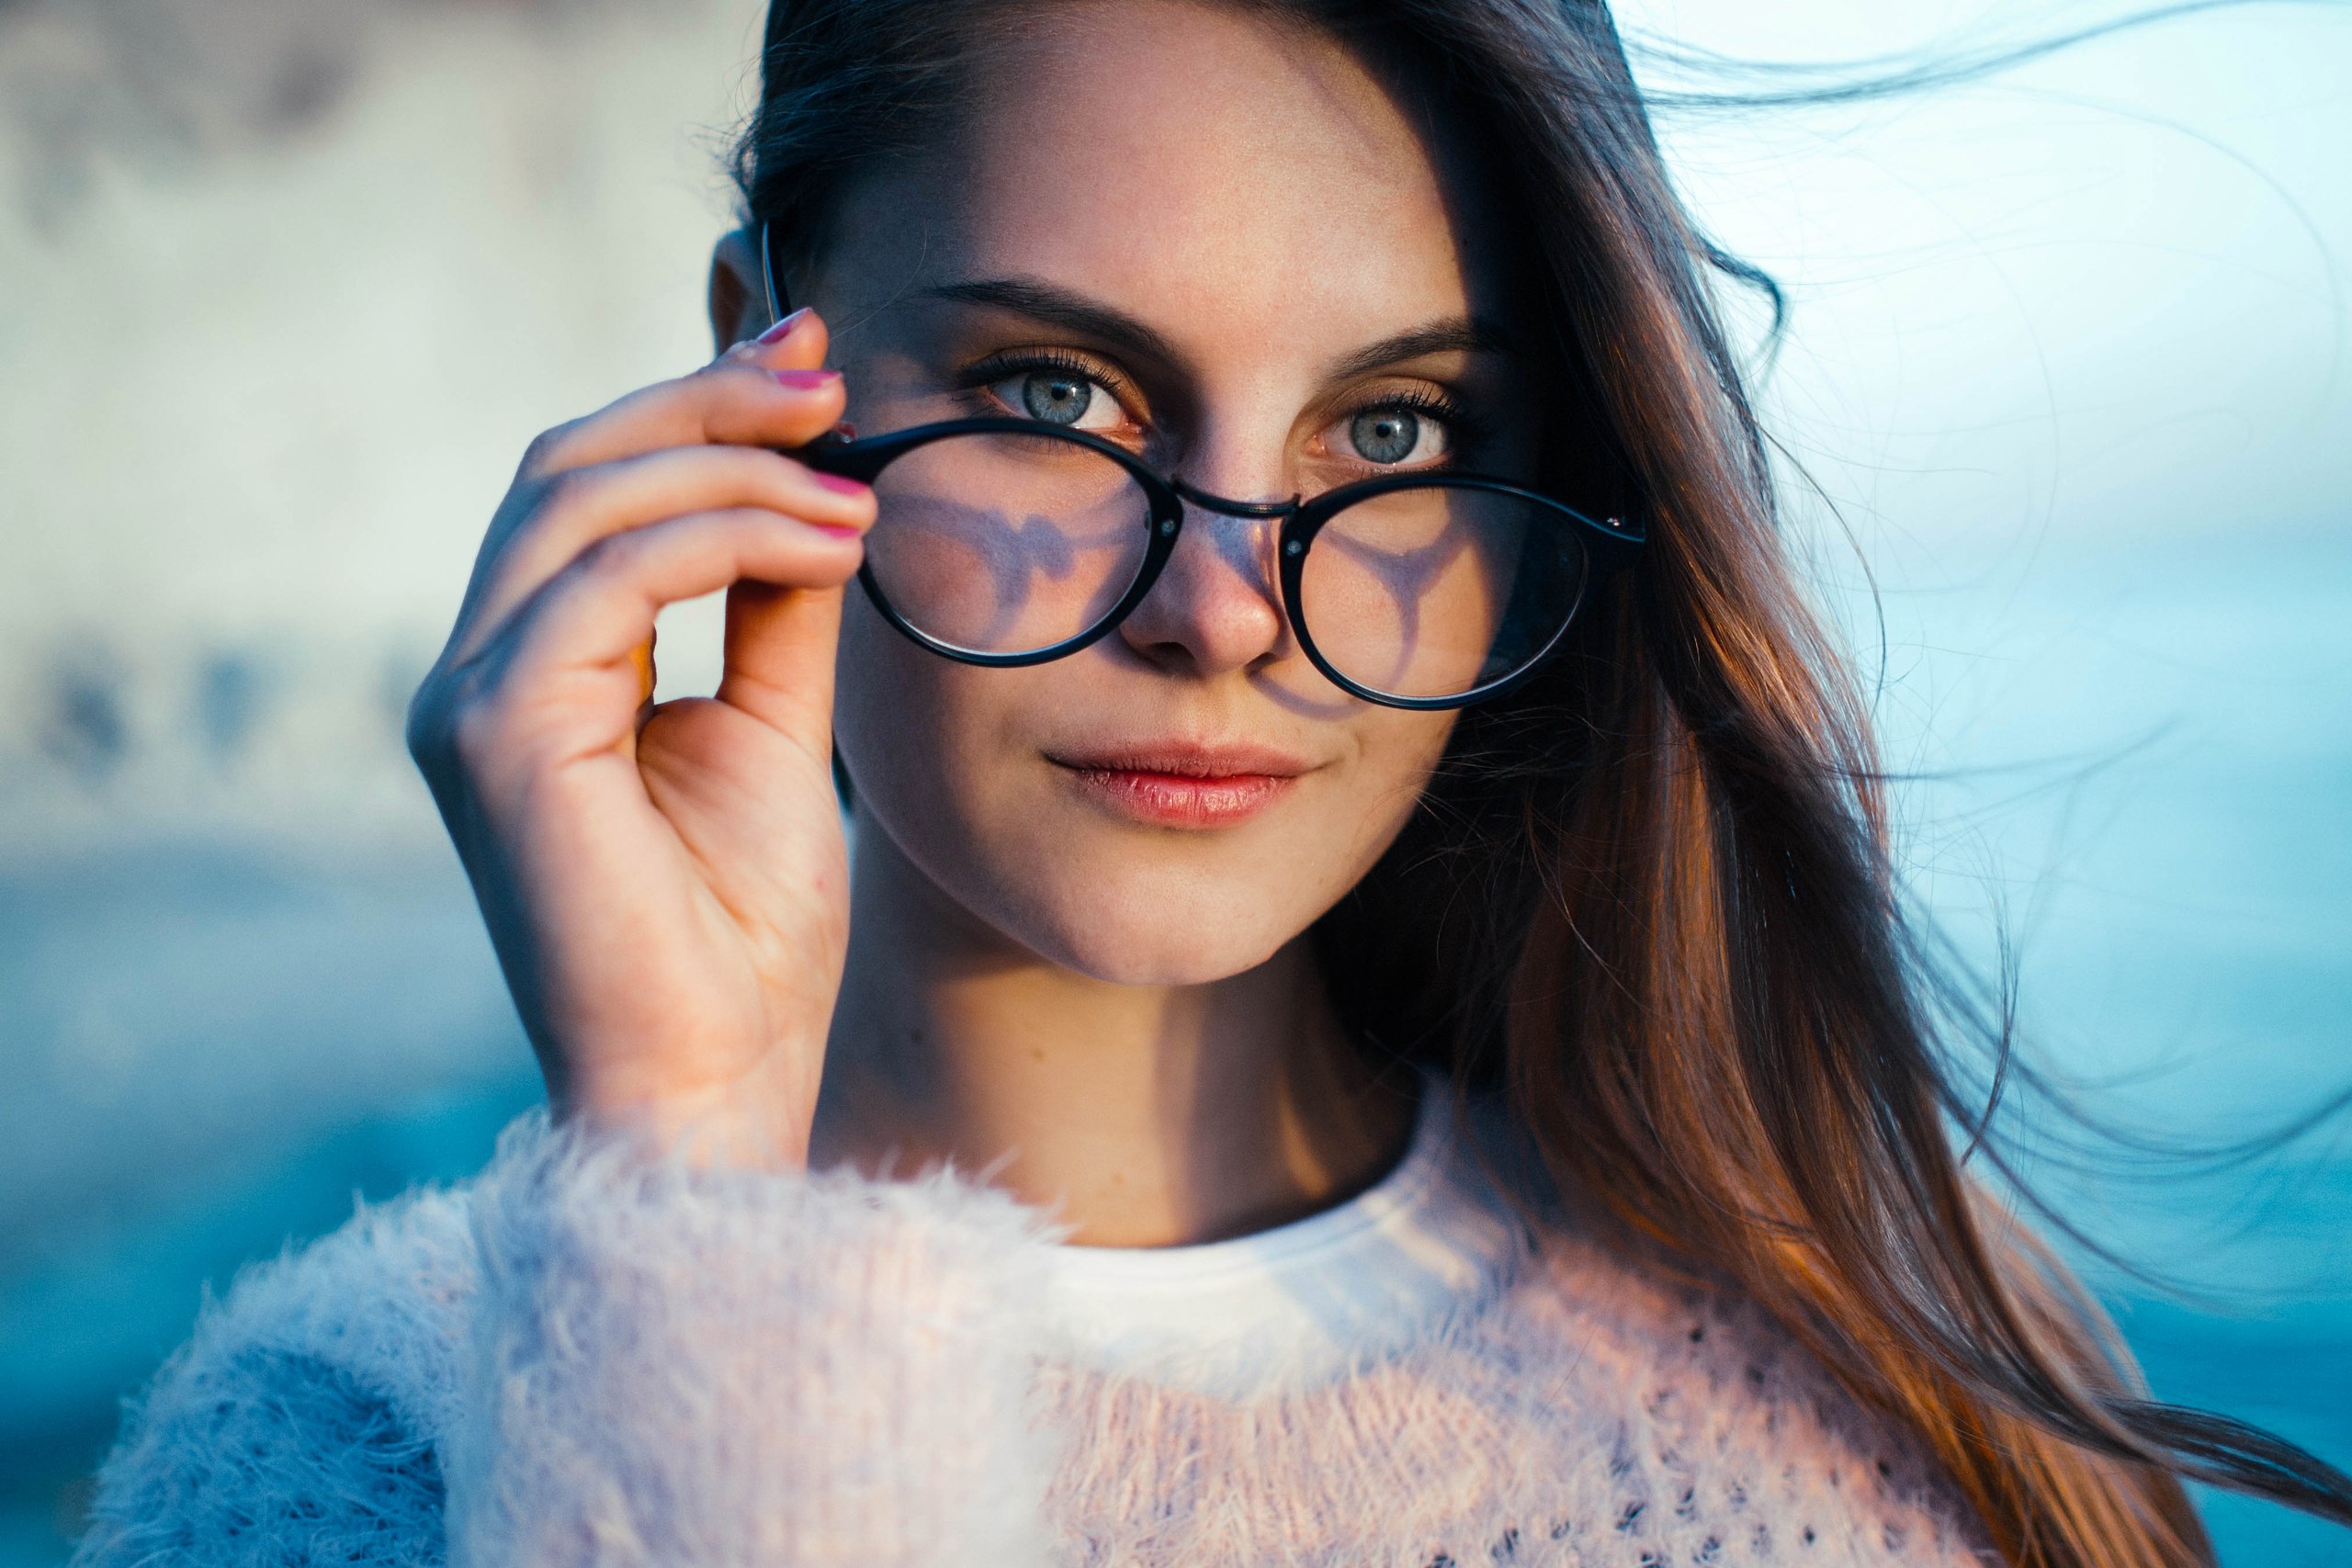 Women Face Portrait Pink Nails Women With Glasses Touching Glasses 2560x1707